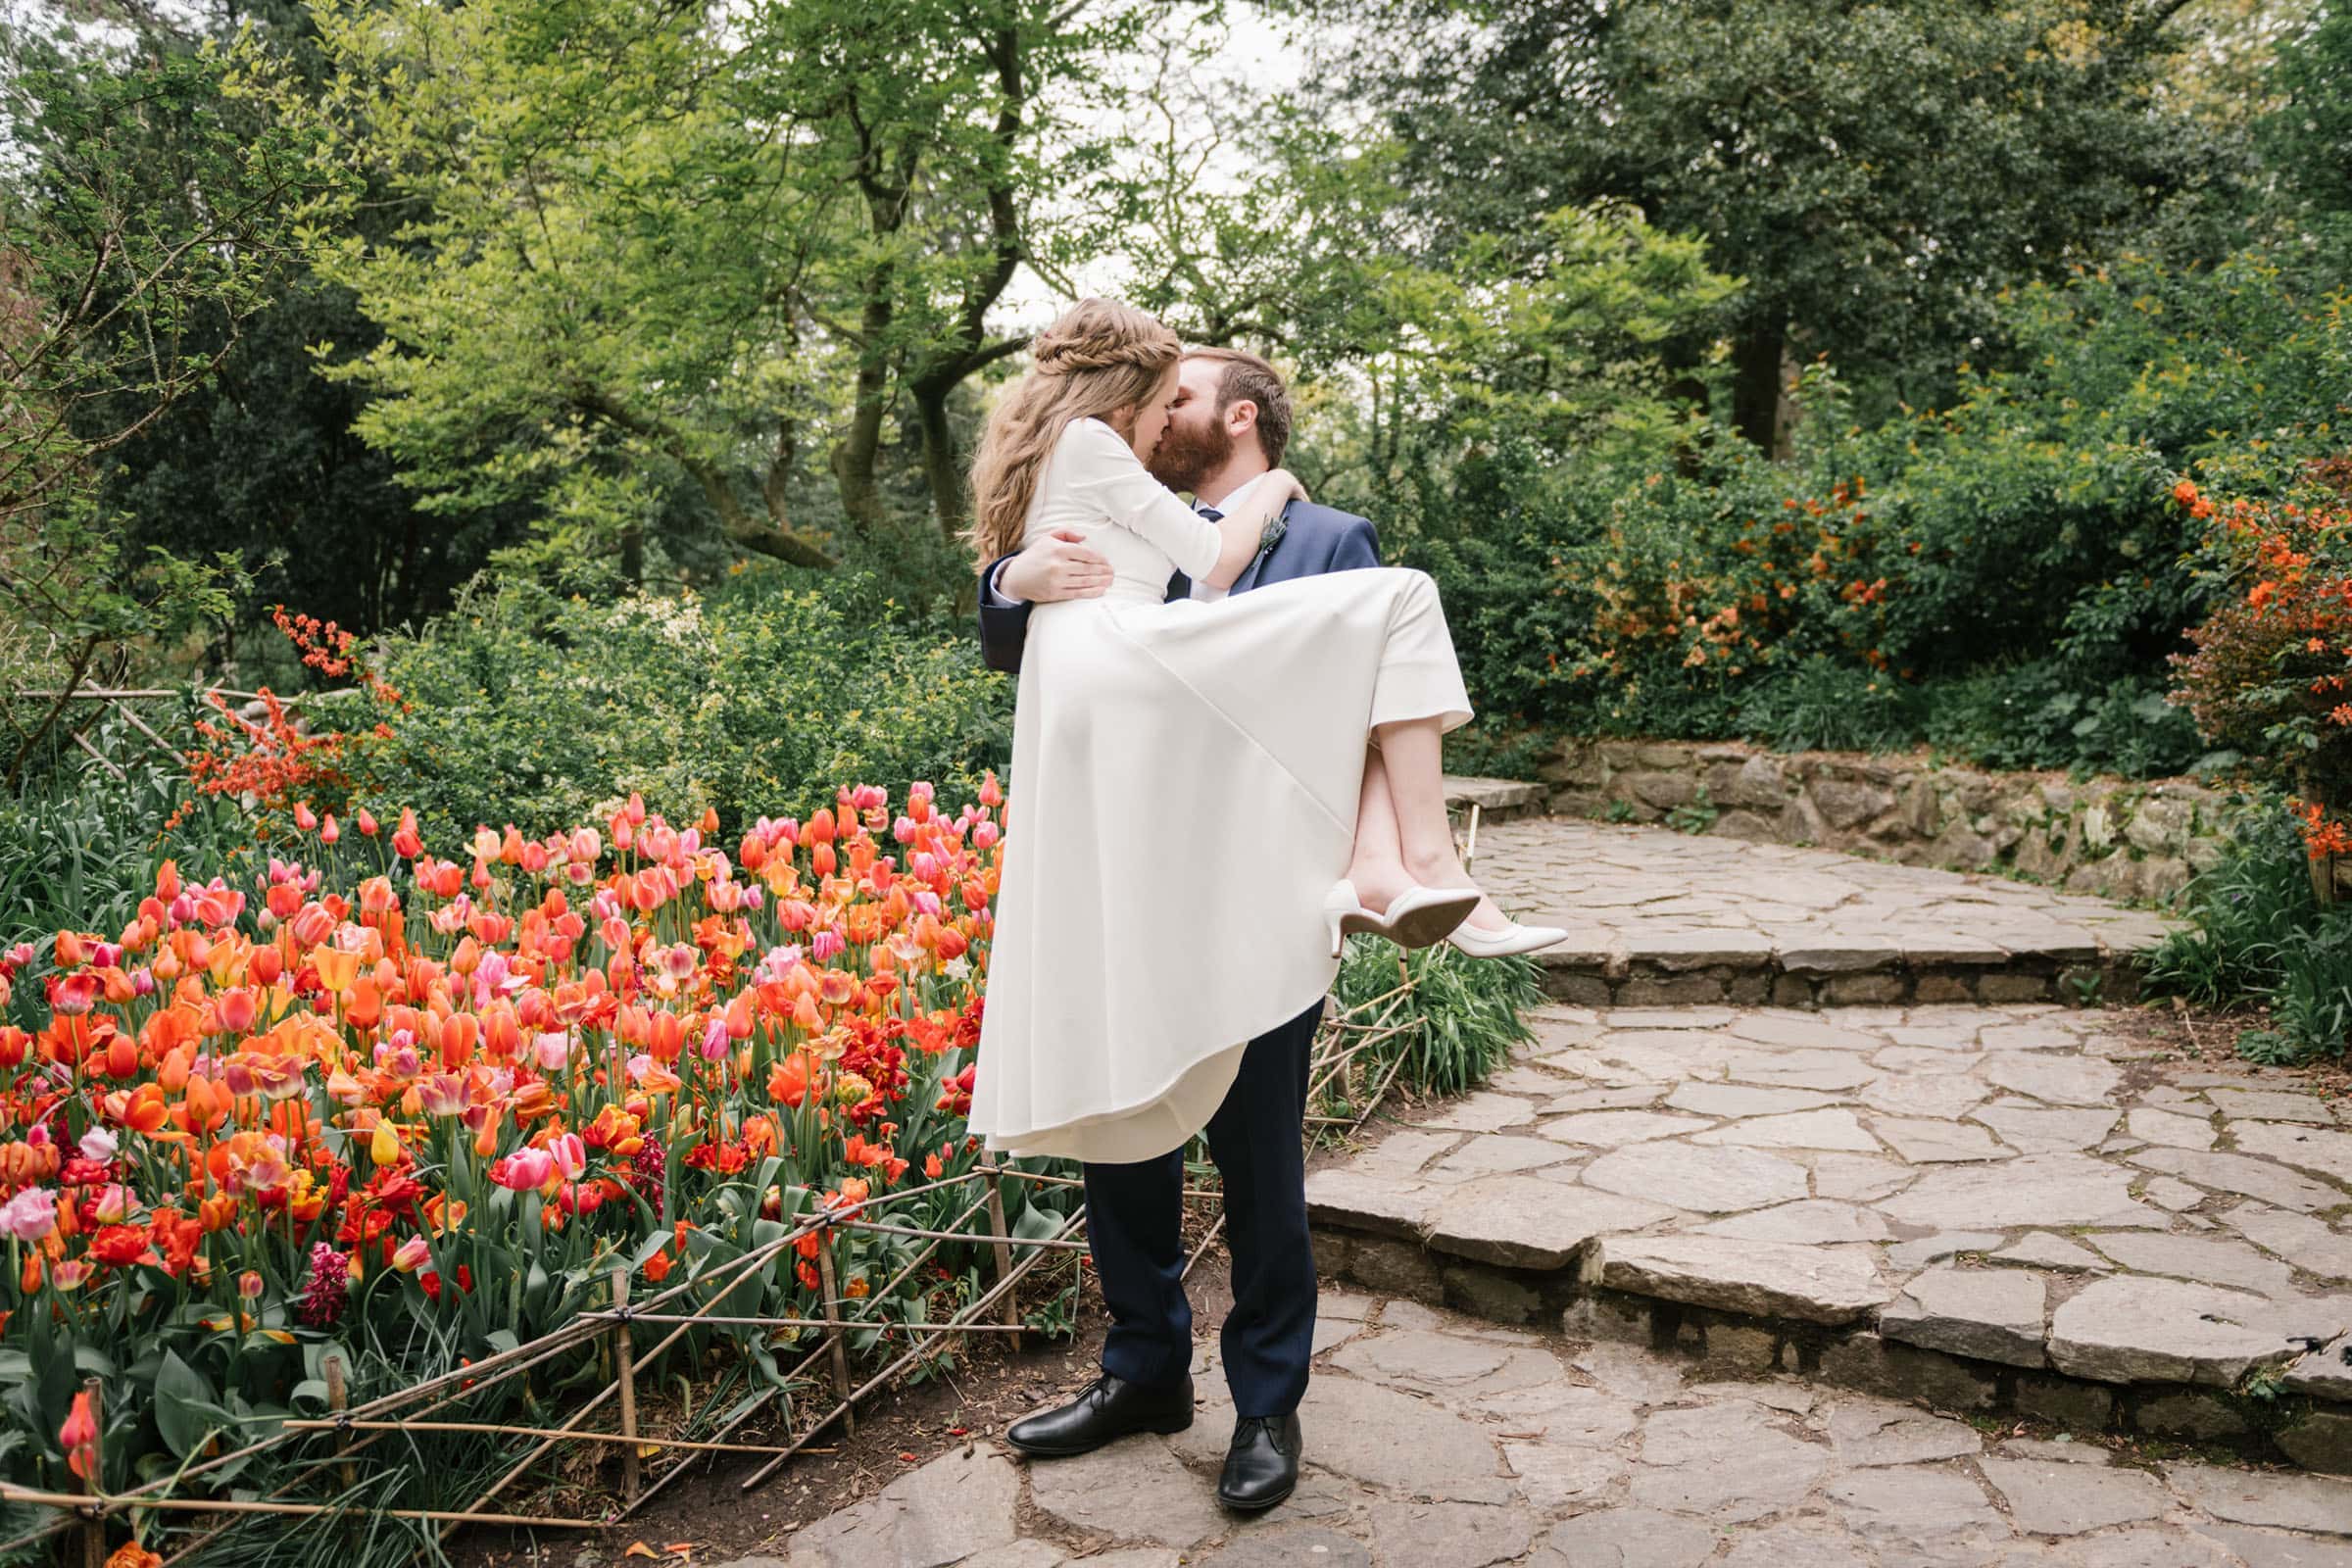 Best Central Park wedding locations in NYC